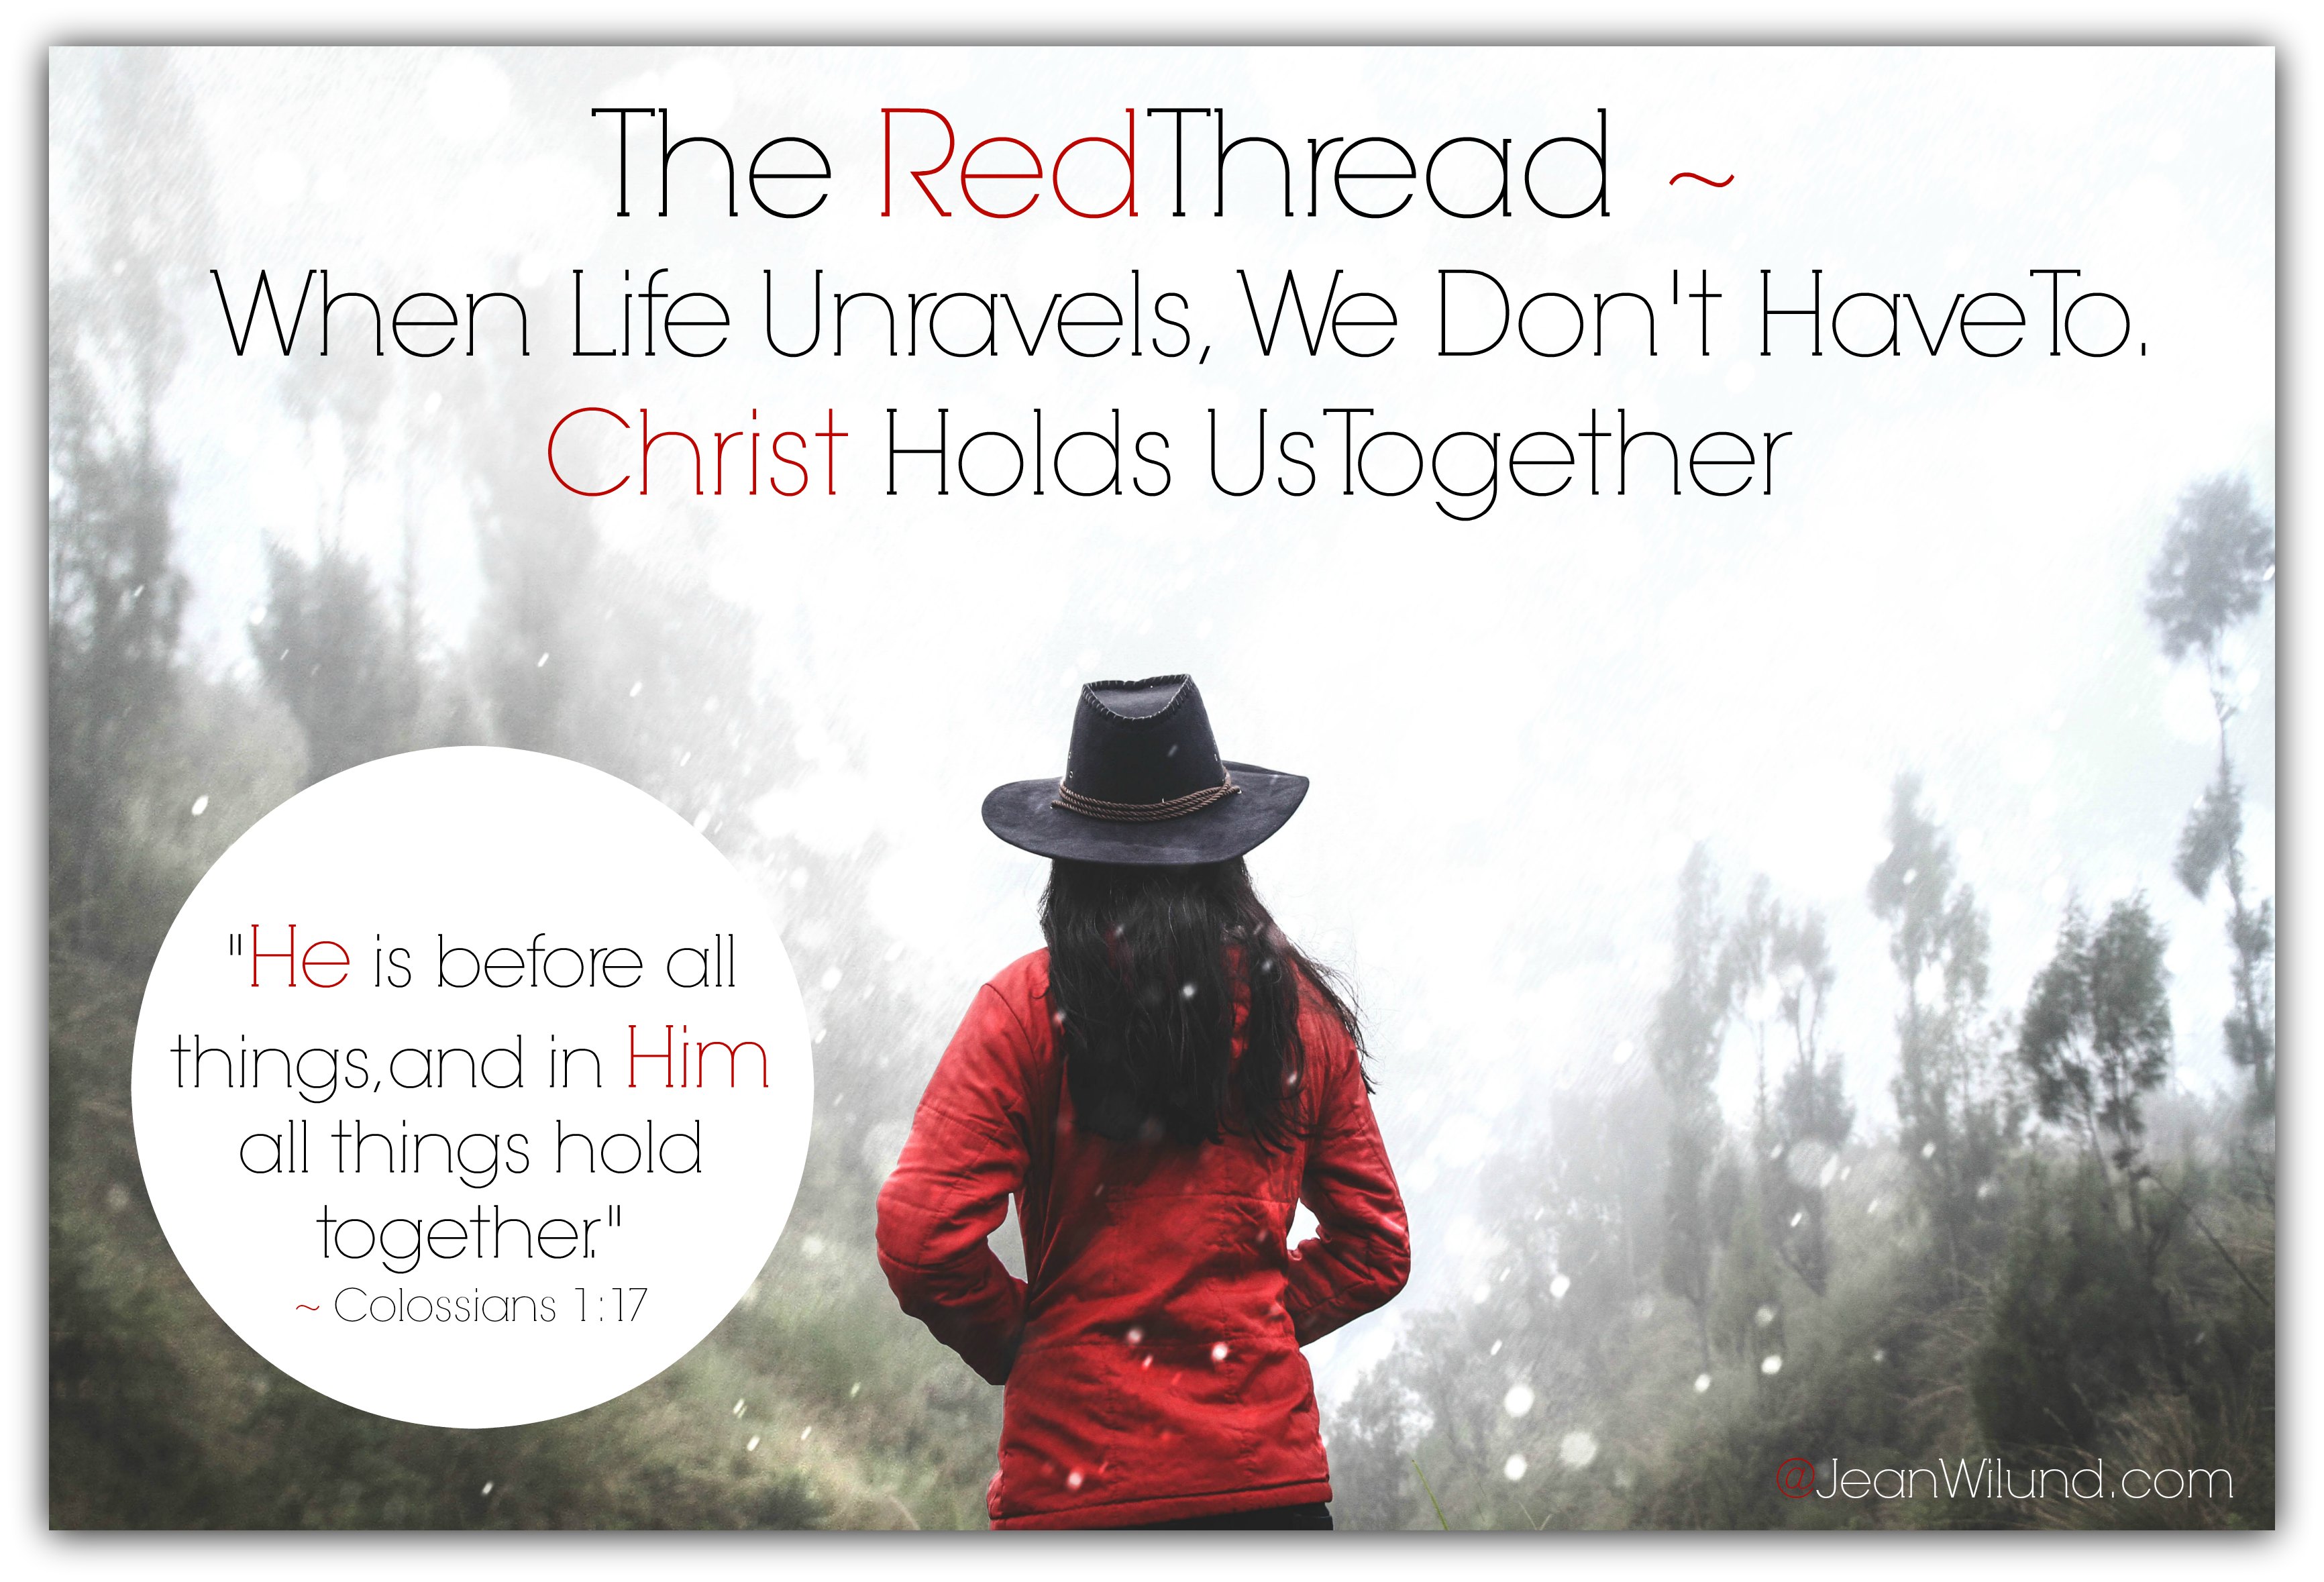 Watch & Read: The Red Thread: When Life Unravels, We Don't Have to. Christ Holds Us Together. (www.JeanWilund.com) Colossians 1:17